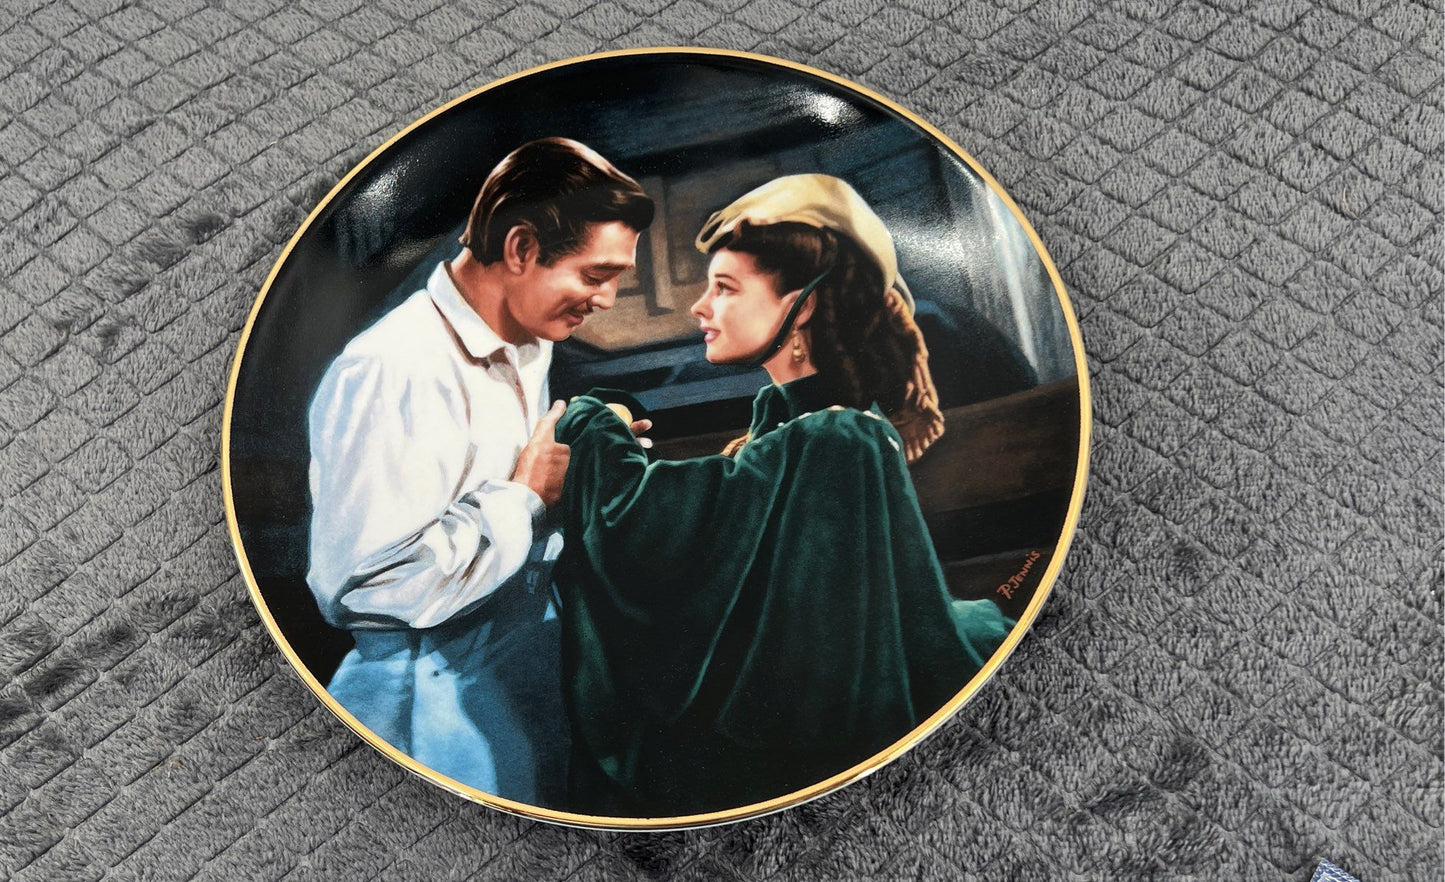 Gone With The Wind Collectors Plates Lot Of 2-W.S. George-1990s-5th & 6th Issue